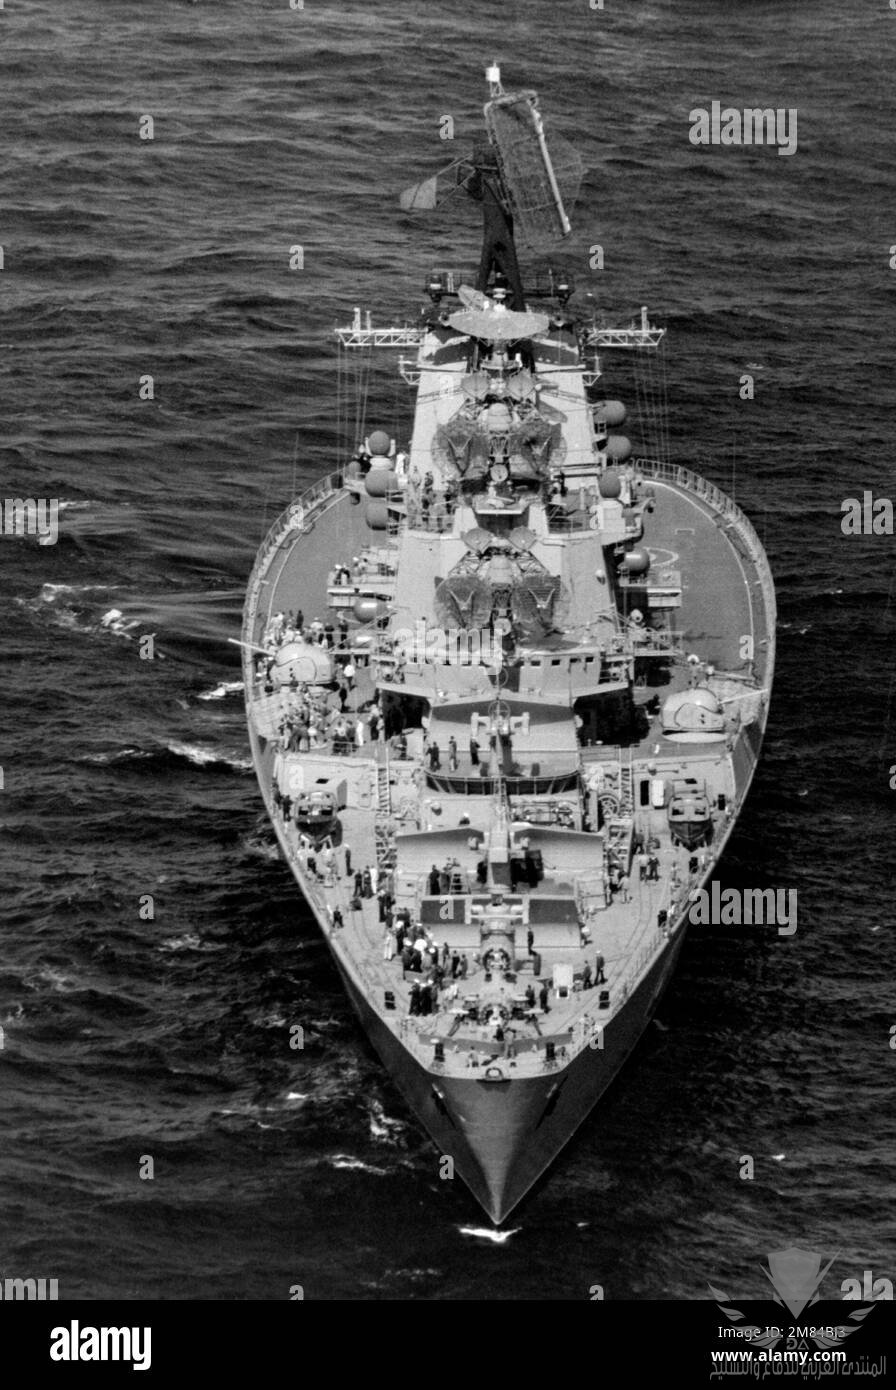 an-aerial-bow-view-of-the-soviet-moskva-class-guided-missile-aviation-cruiser-leningrad-countr...jpg